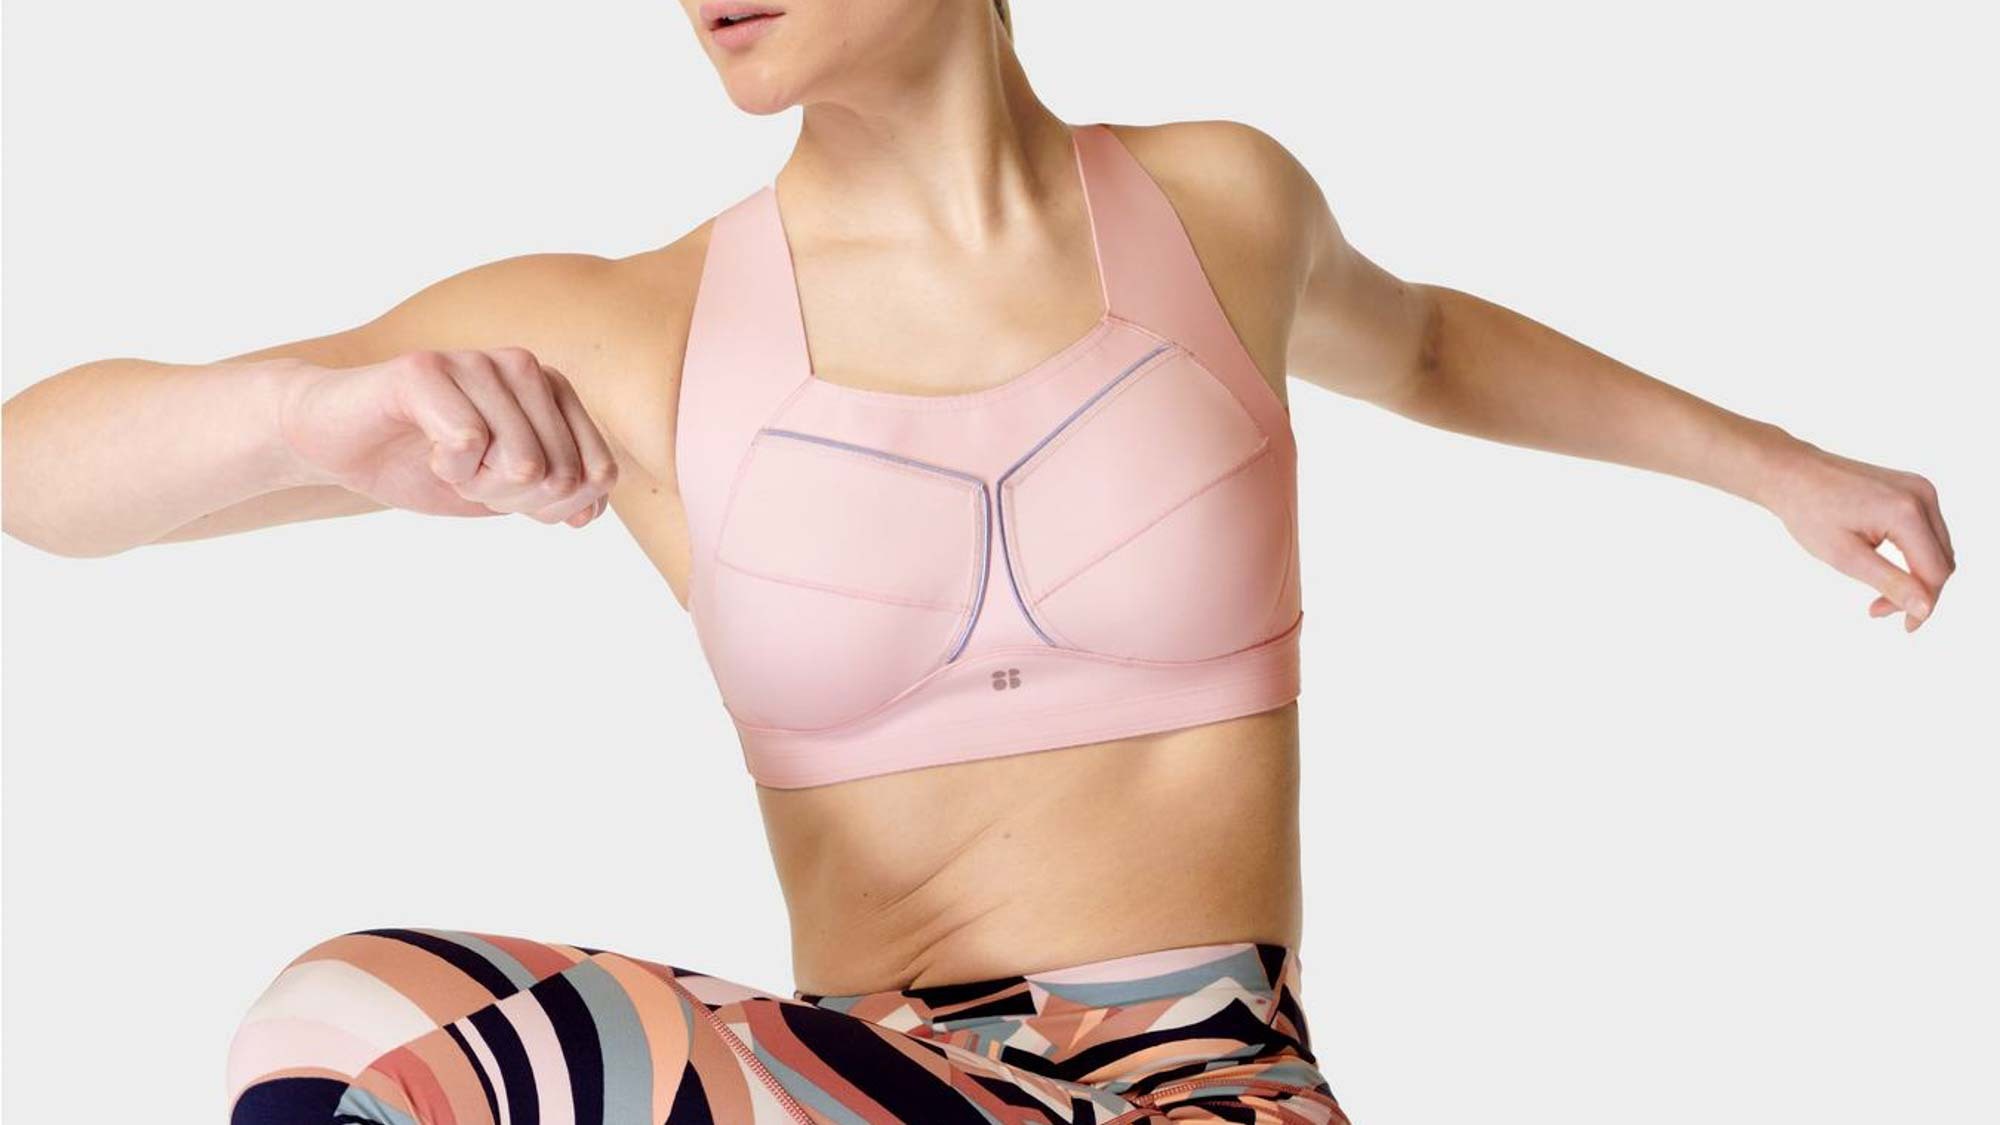 The 20 Best Sports Bras for Large Boobs, According to Reviewers